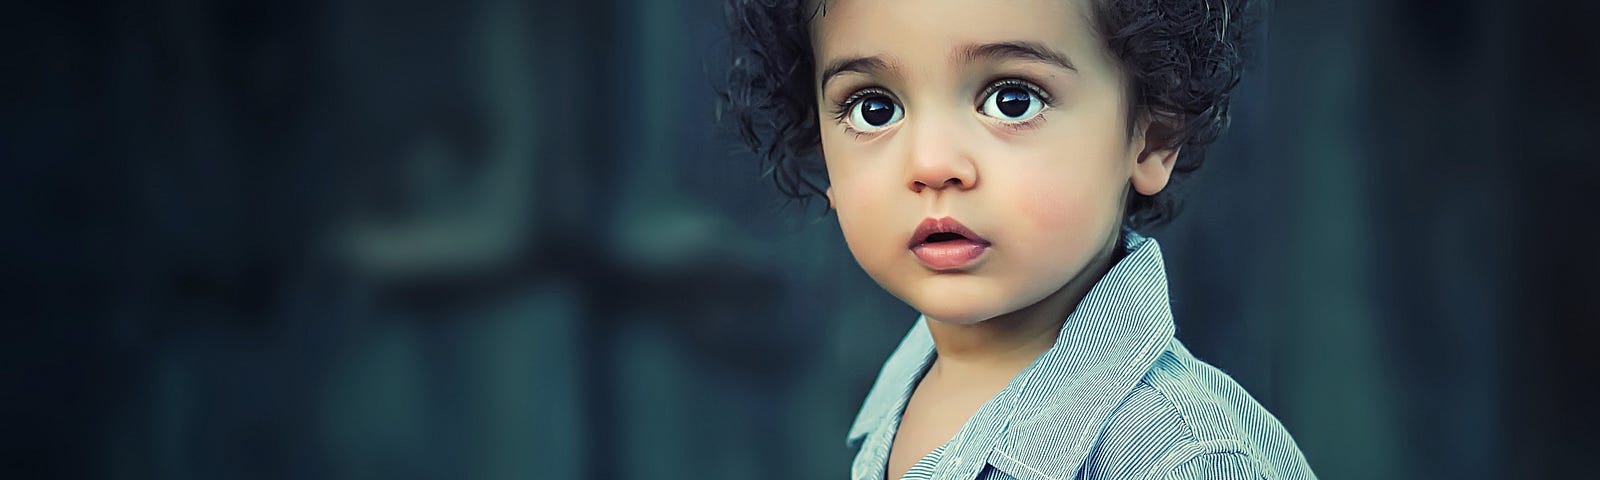 Toddler with brown hair staring at the camera. Dark blue wall in the background. Toddler is wearing a blue shirt.